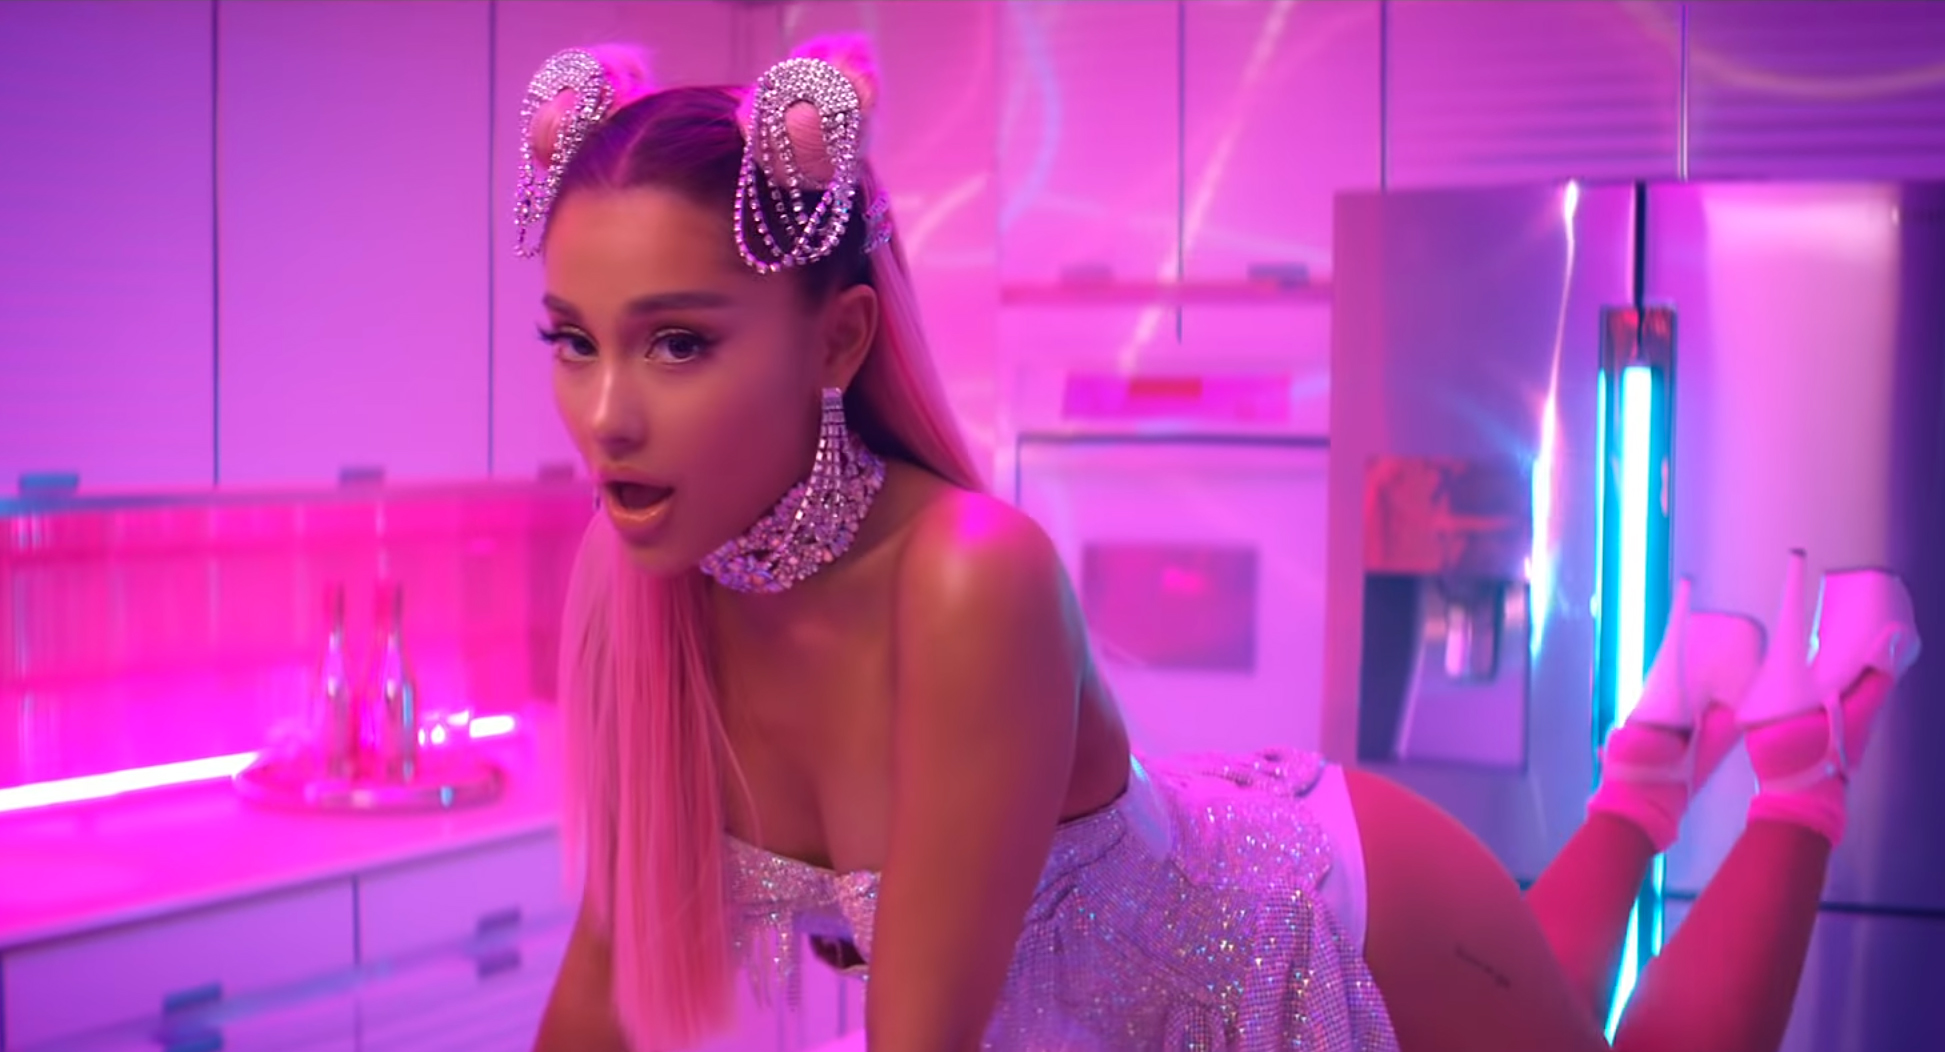 7 Rings': What Is Ariana Grande's New Song About? Release Date, Lyrics,  Video & More - Capital